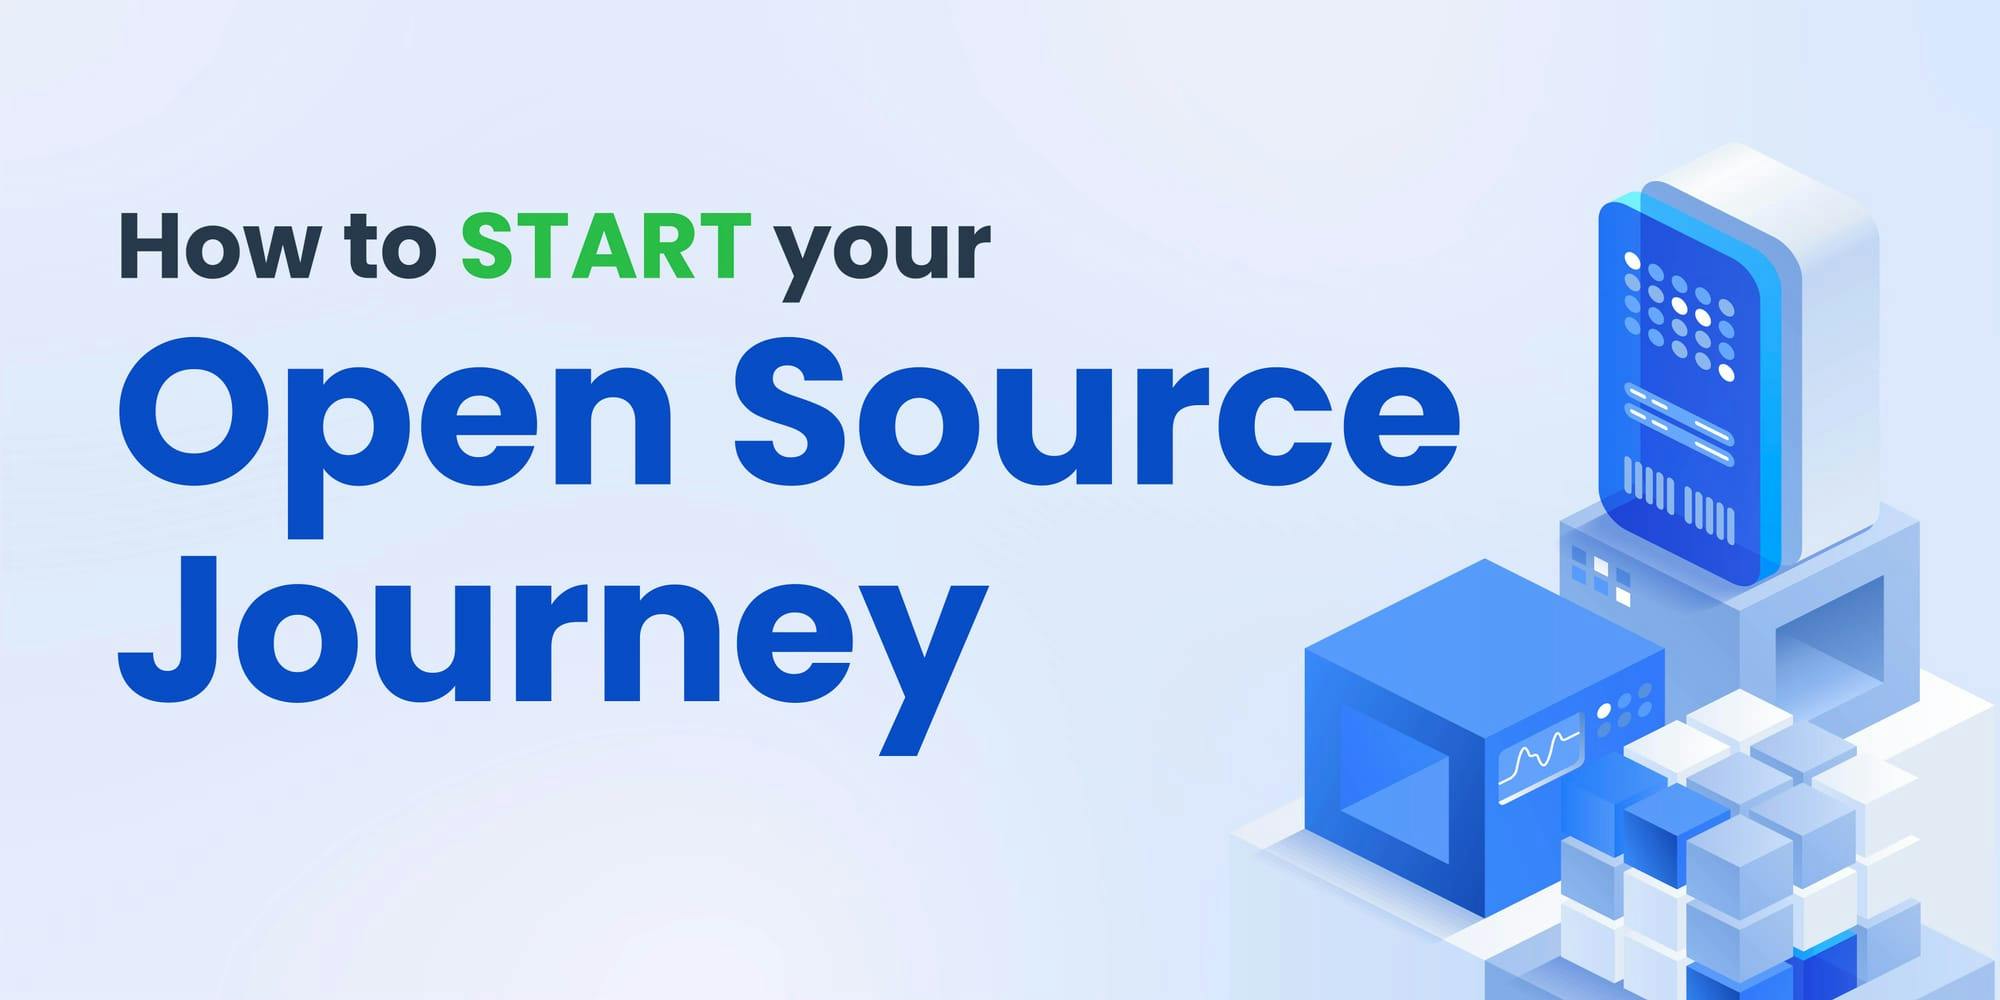 How to start your Open Source journey